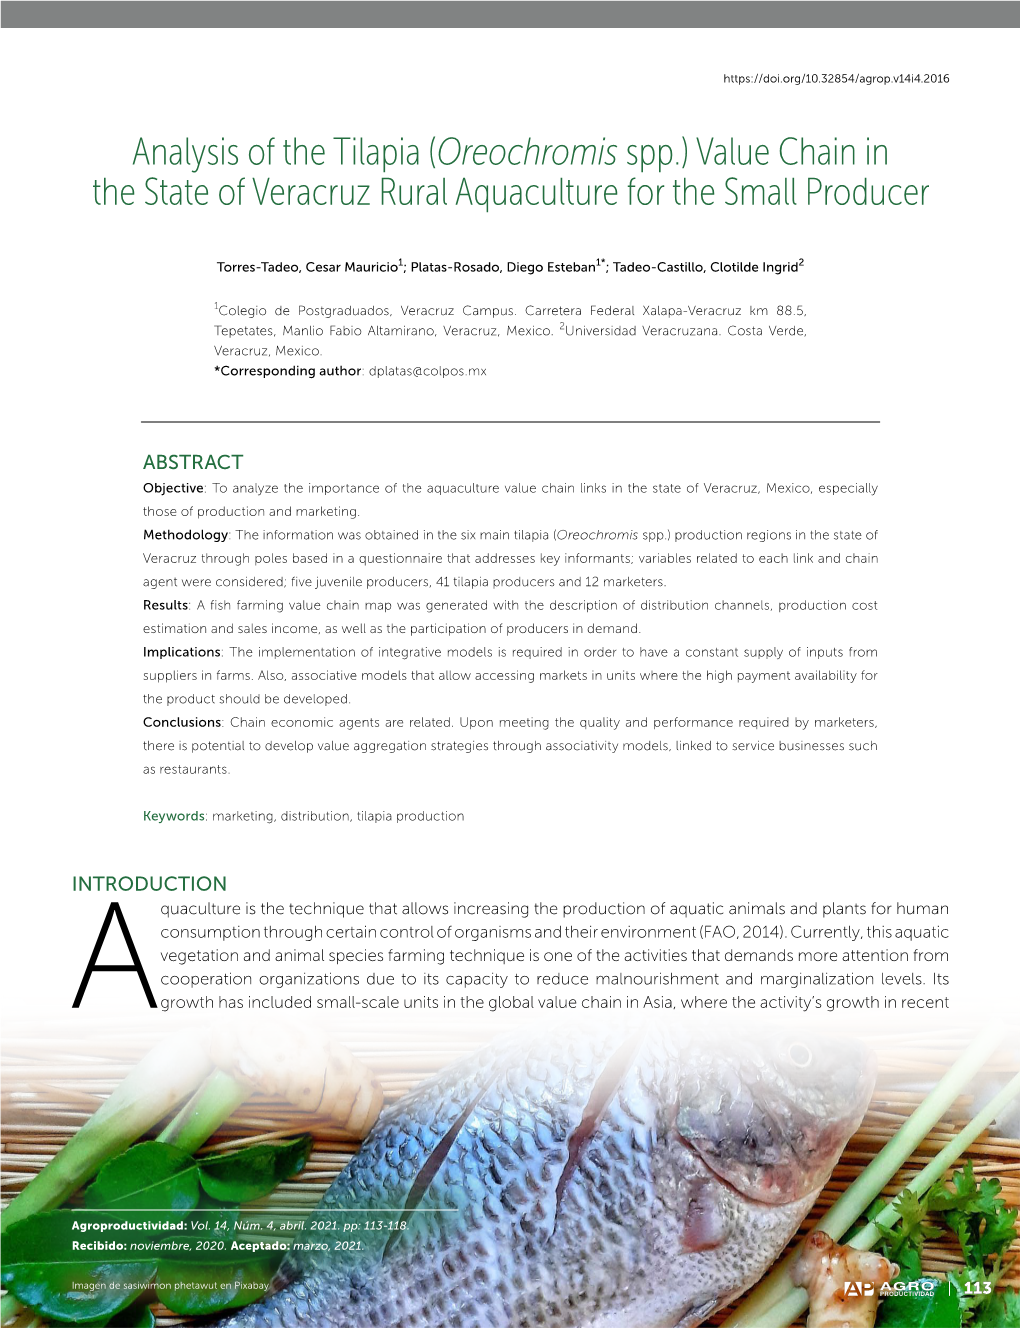 Analysis of the Tilapia (Oreochromis Spp.) Value Chain in the State of Veracruz Rural Aquaculture for the Small Producer